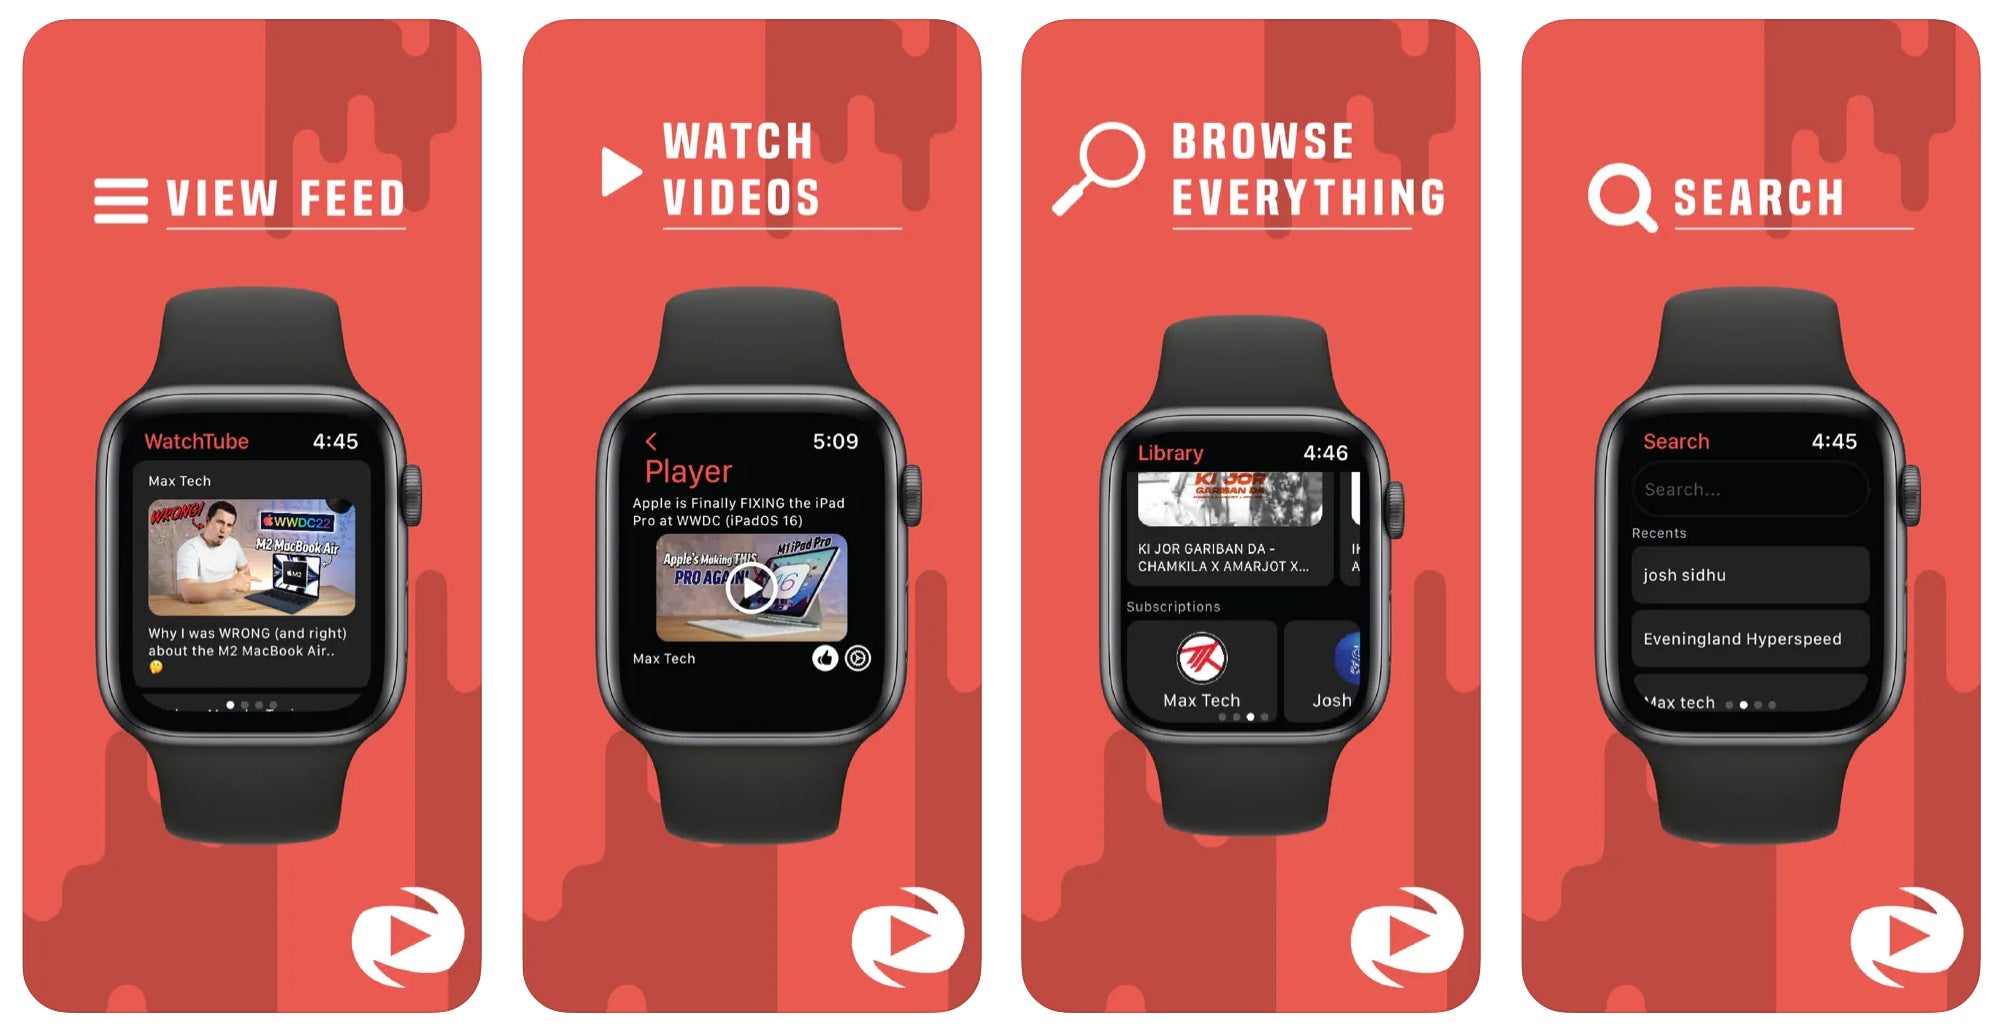 You Can Finally Waste Work Hours Watching YouTube Directly On Your Apple Watch